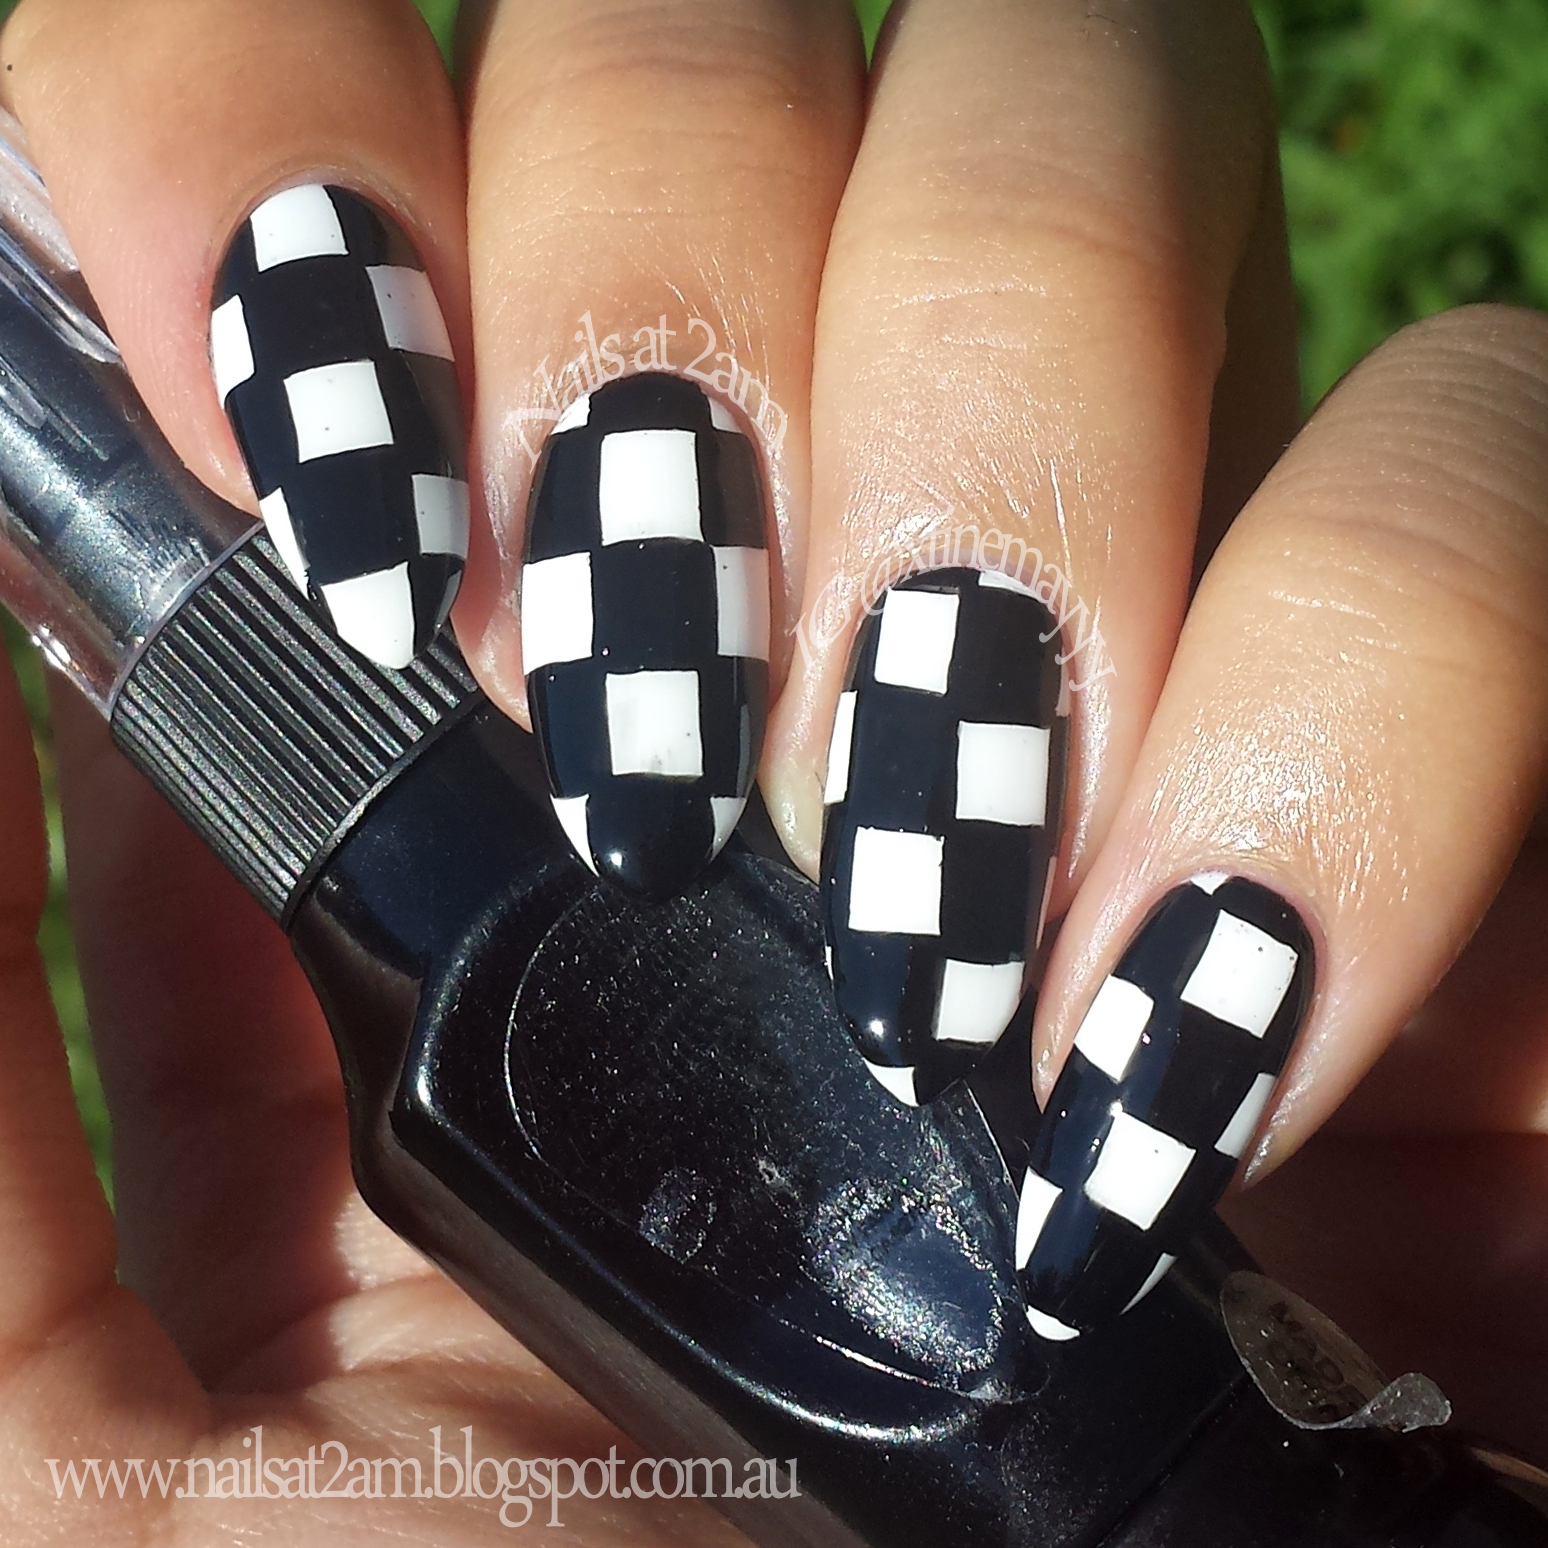 Nails At 2am: Simply Spoiled Beauty Products Review: Black Nail Art Pen